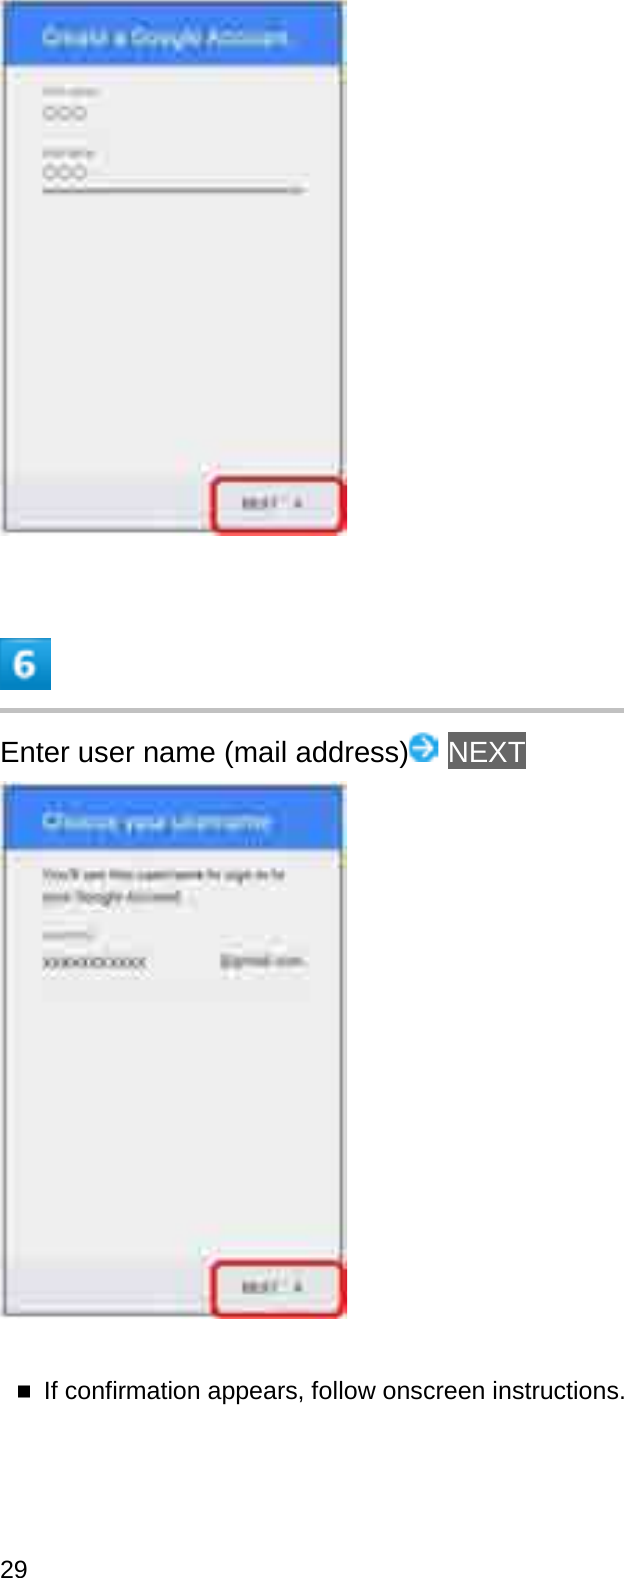 Enter user name (mail address) NEXTIf confirmation appears, follow onscreen instructions.29